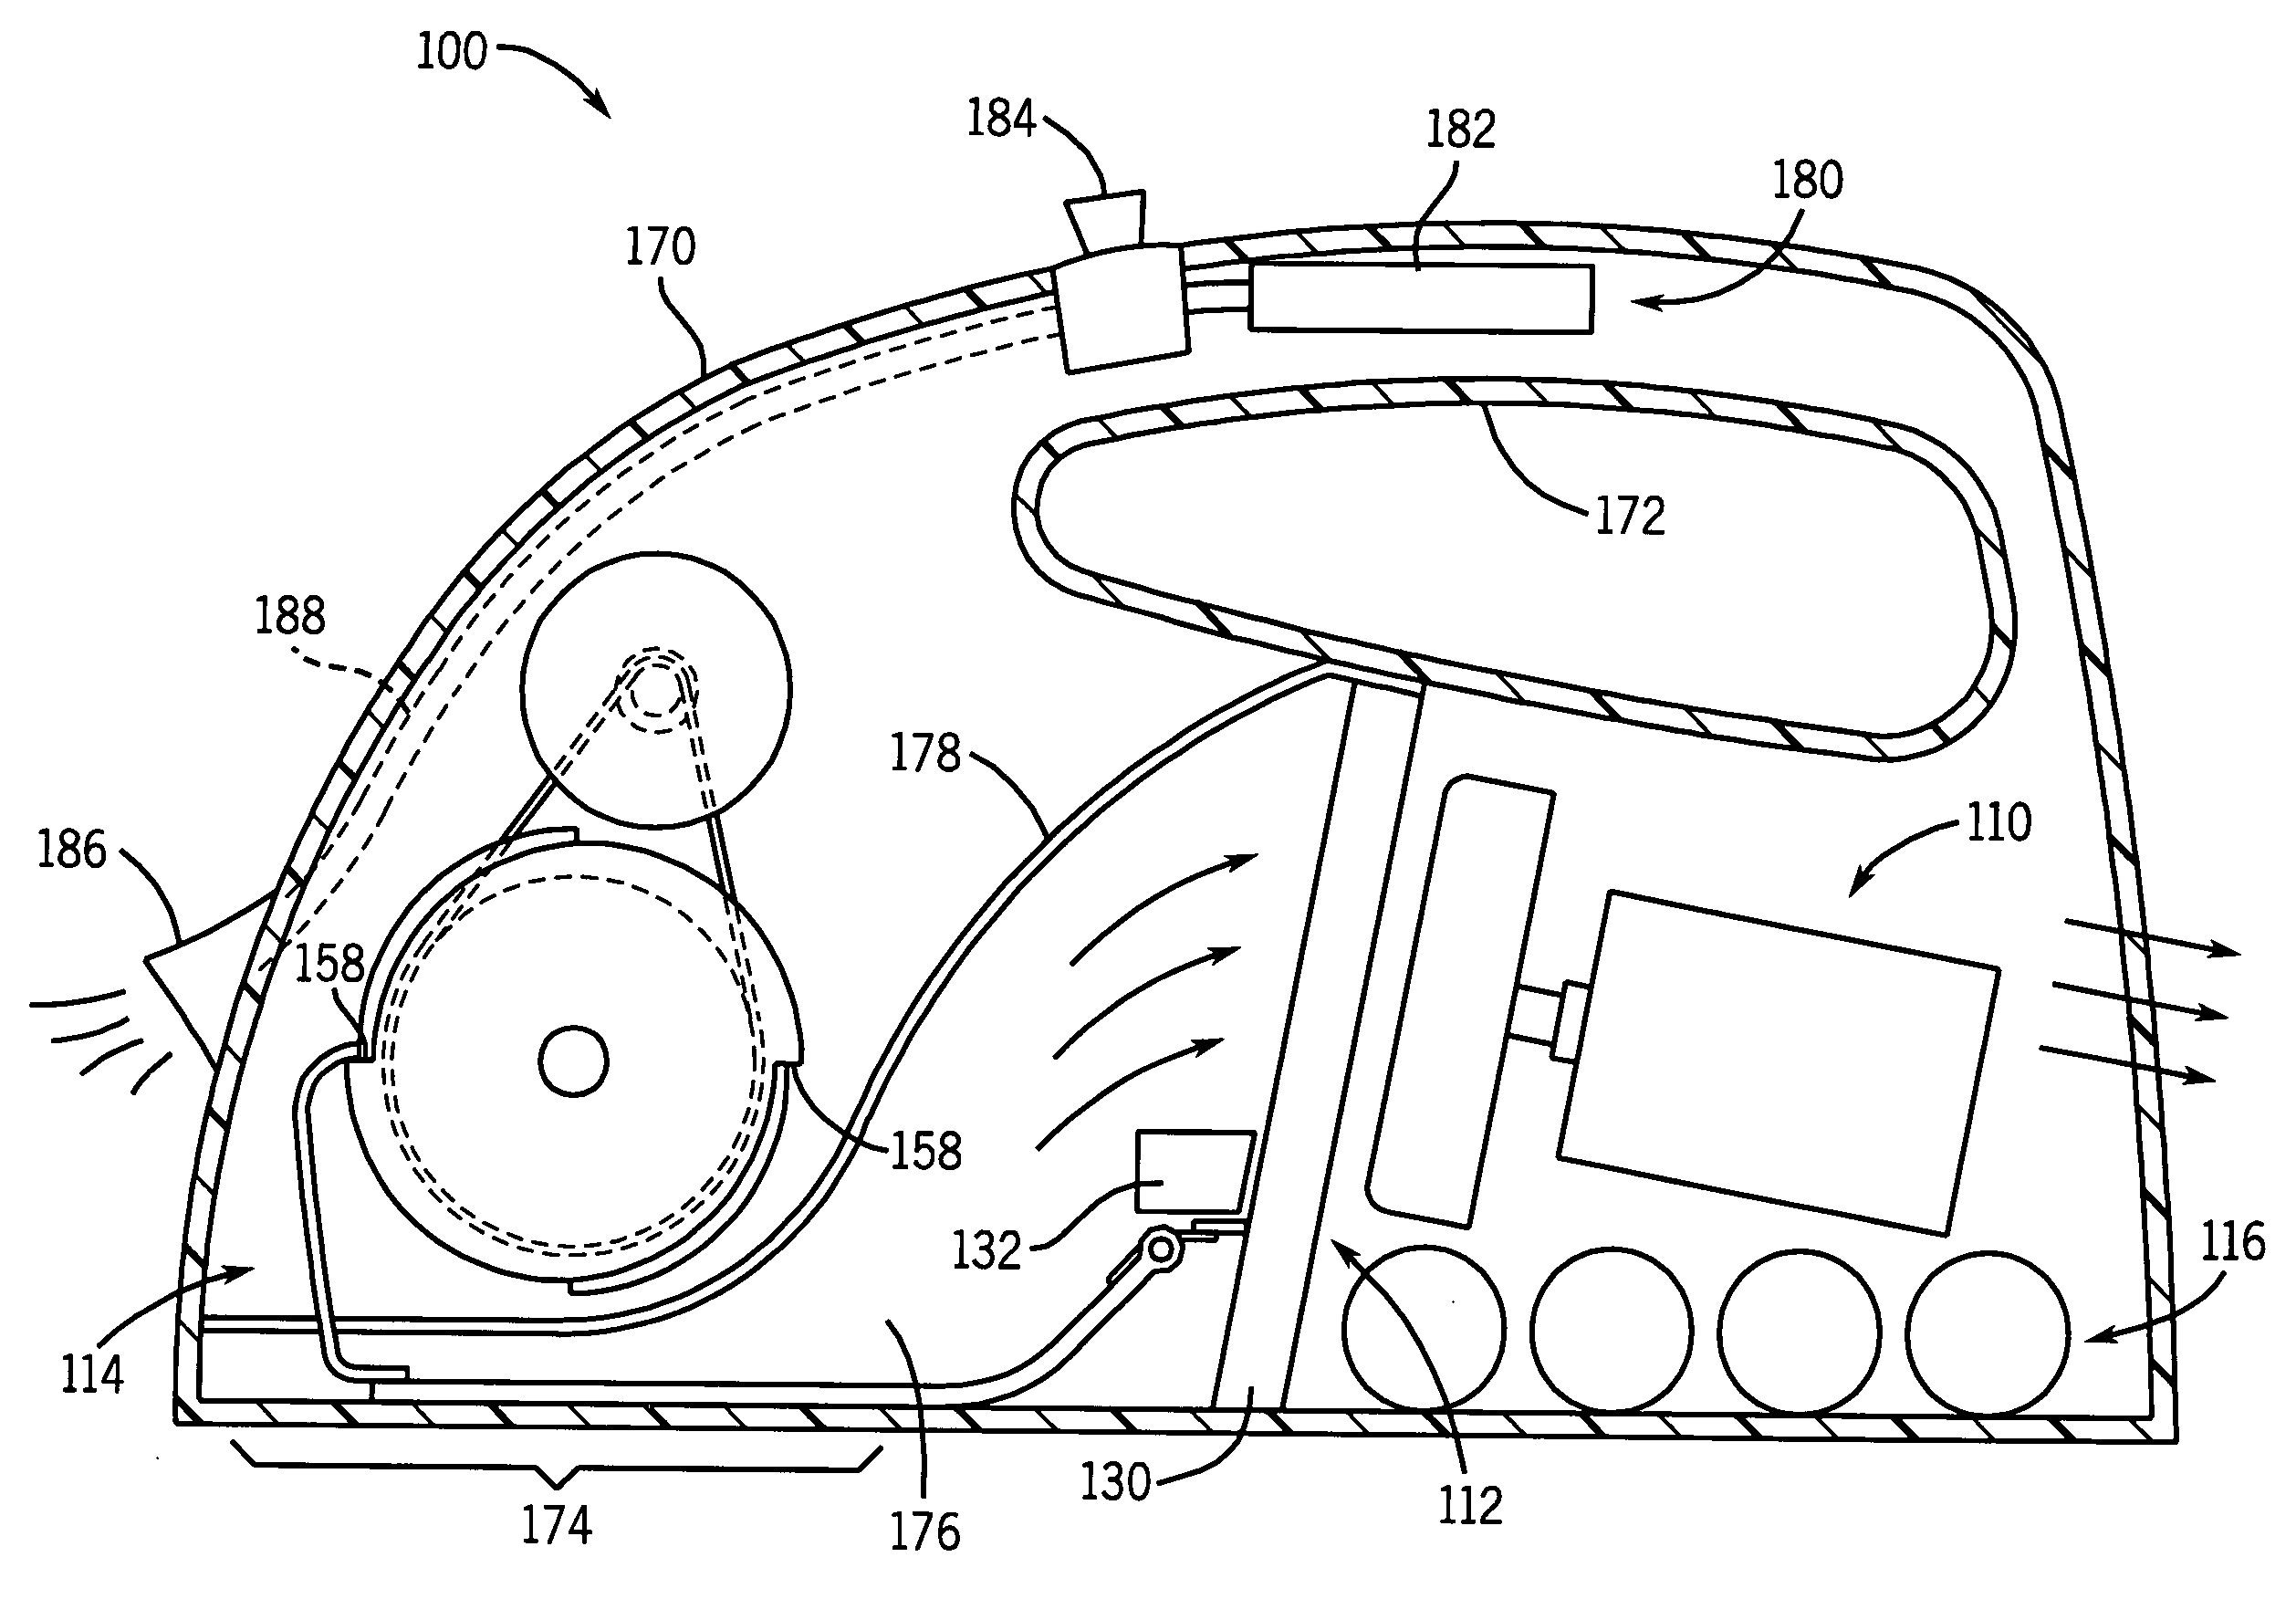 Handheld mechanical soft-surface remediation (SSR) device and method of using same